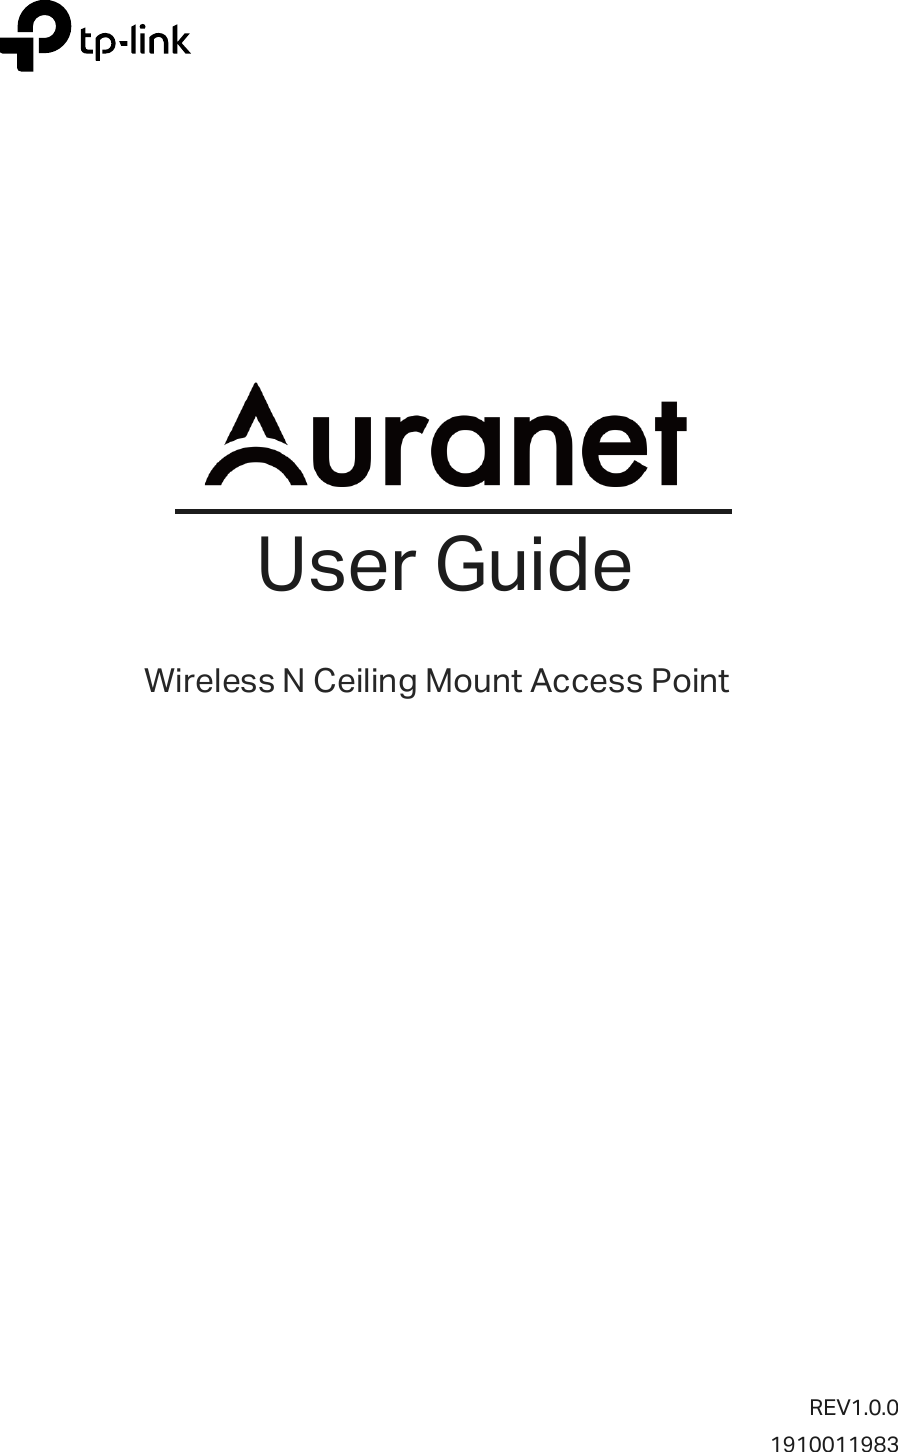            REV1.0.0 1910011983  User Guide Wireless N Ceiling Mount Access Point        